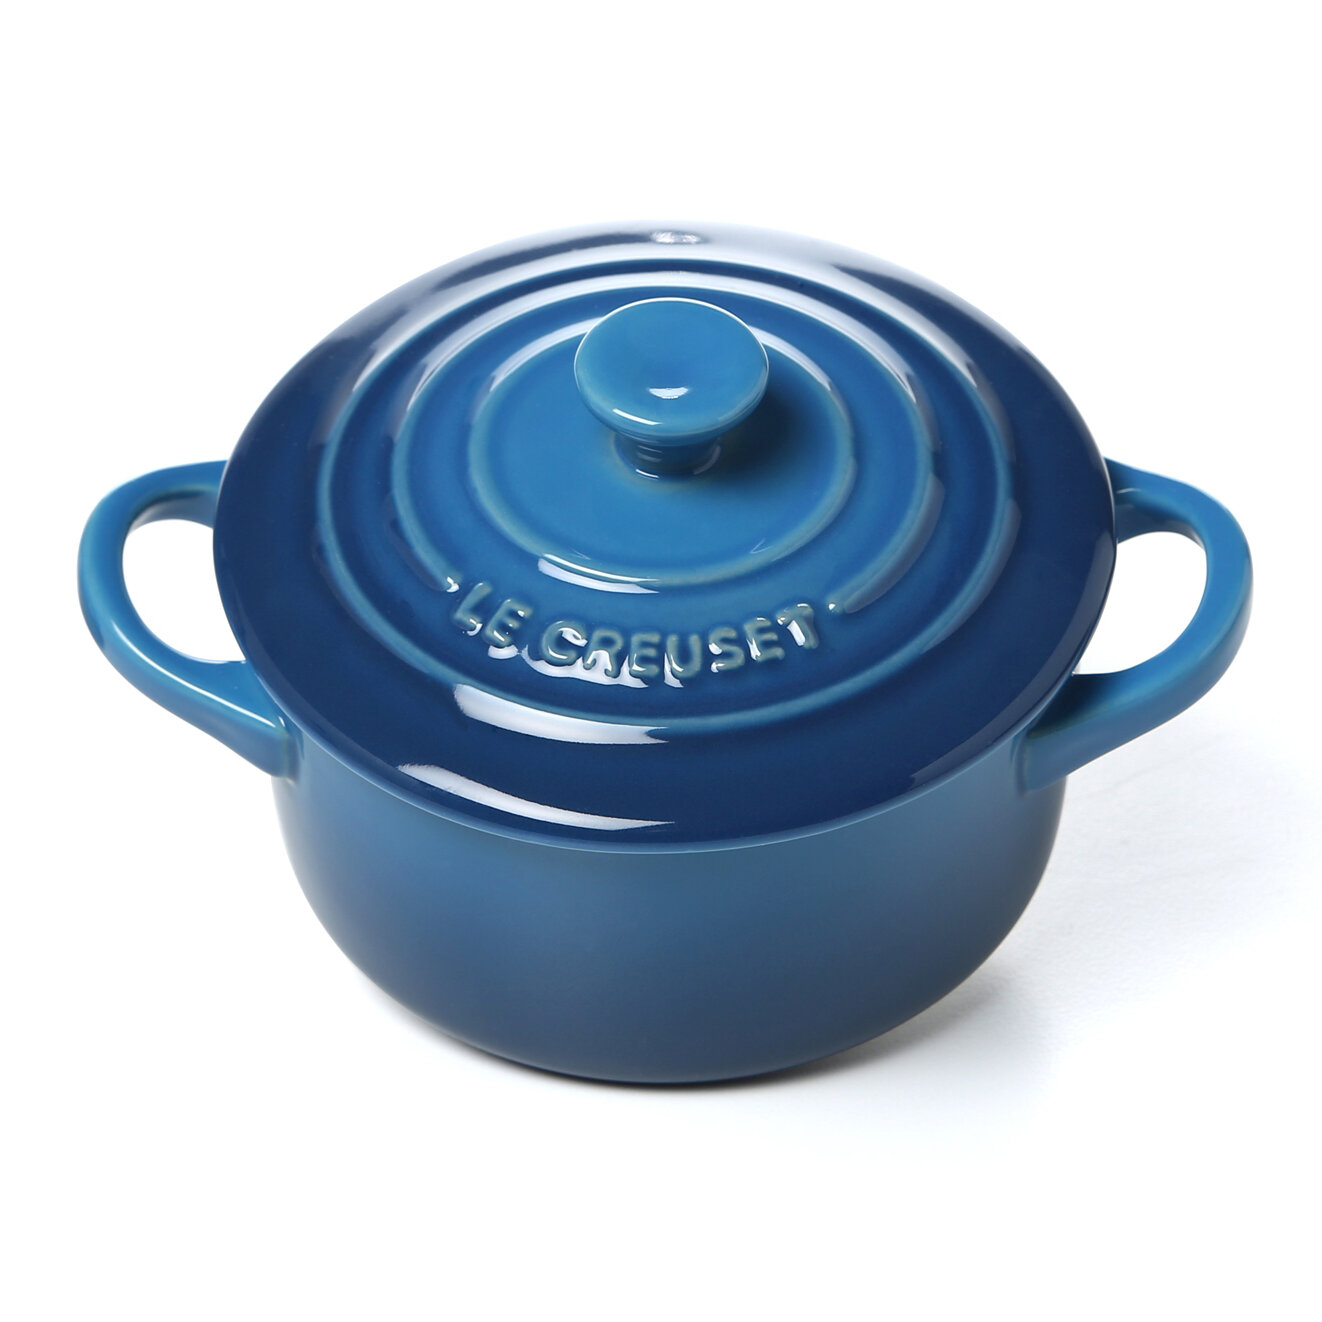 Le Creuset Mini Cocotte Every 580ml Stoneware Oven cooking kitchen GIFT NEW 